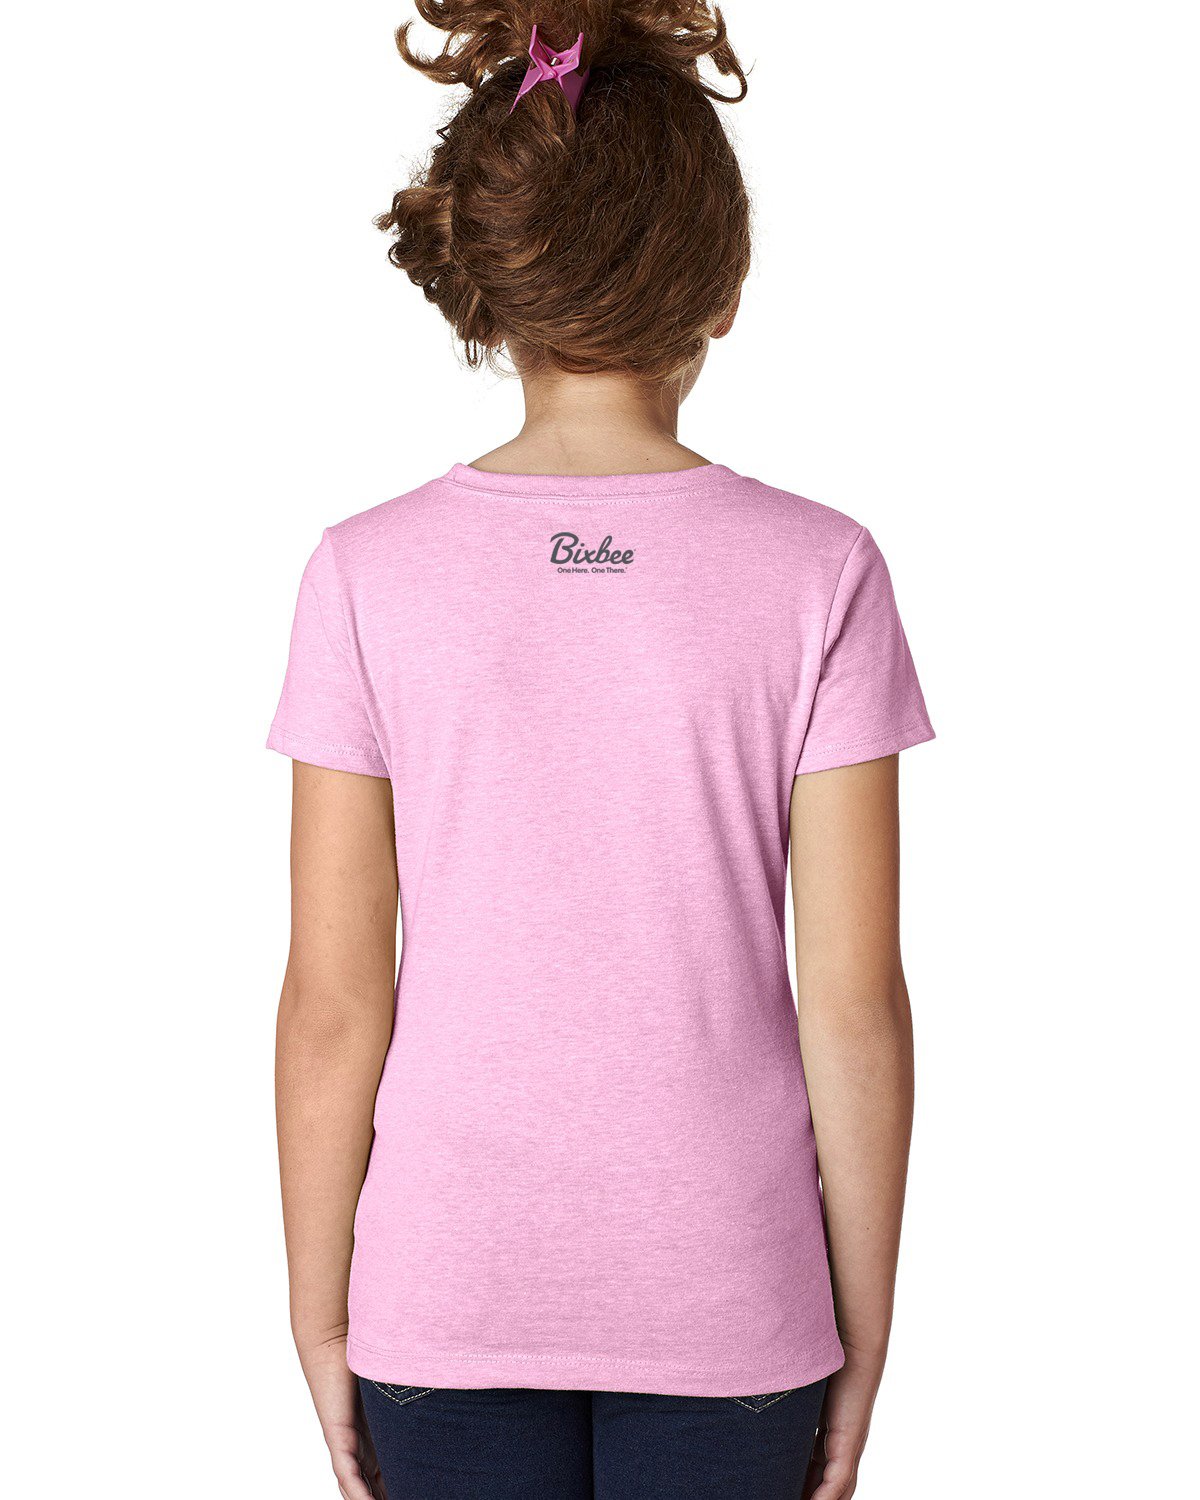 Beauty from the Inside Out' Women's Premium T-Shirt